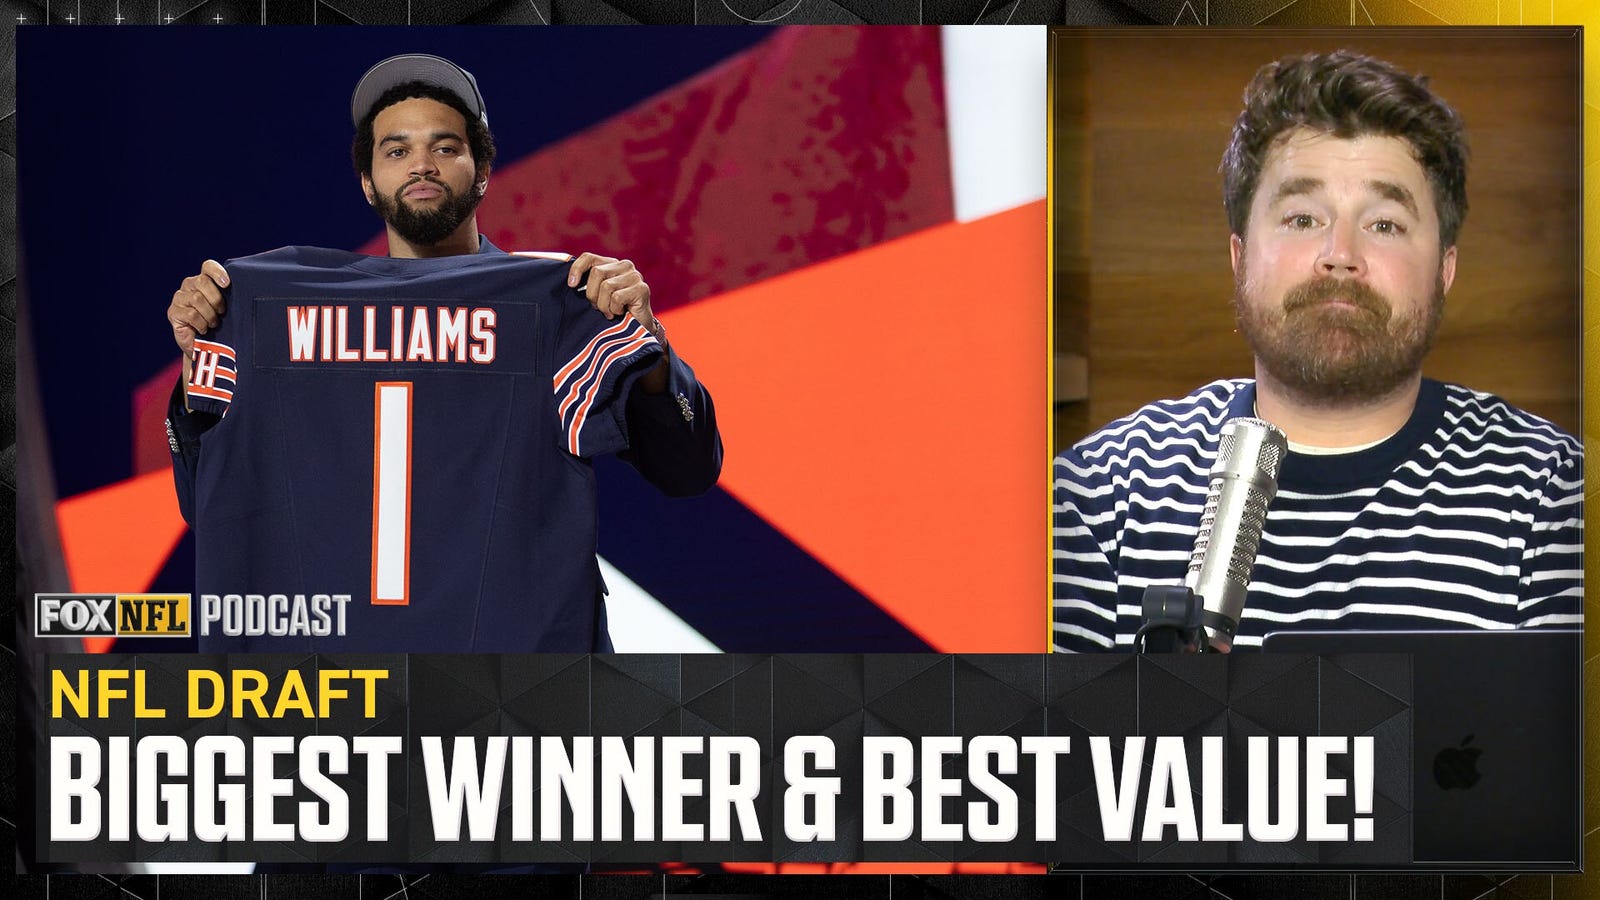 Biggest winner & best value pick from the 1st round of the NFL Draft